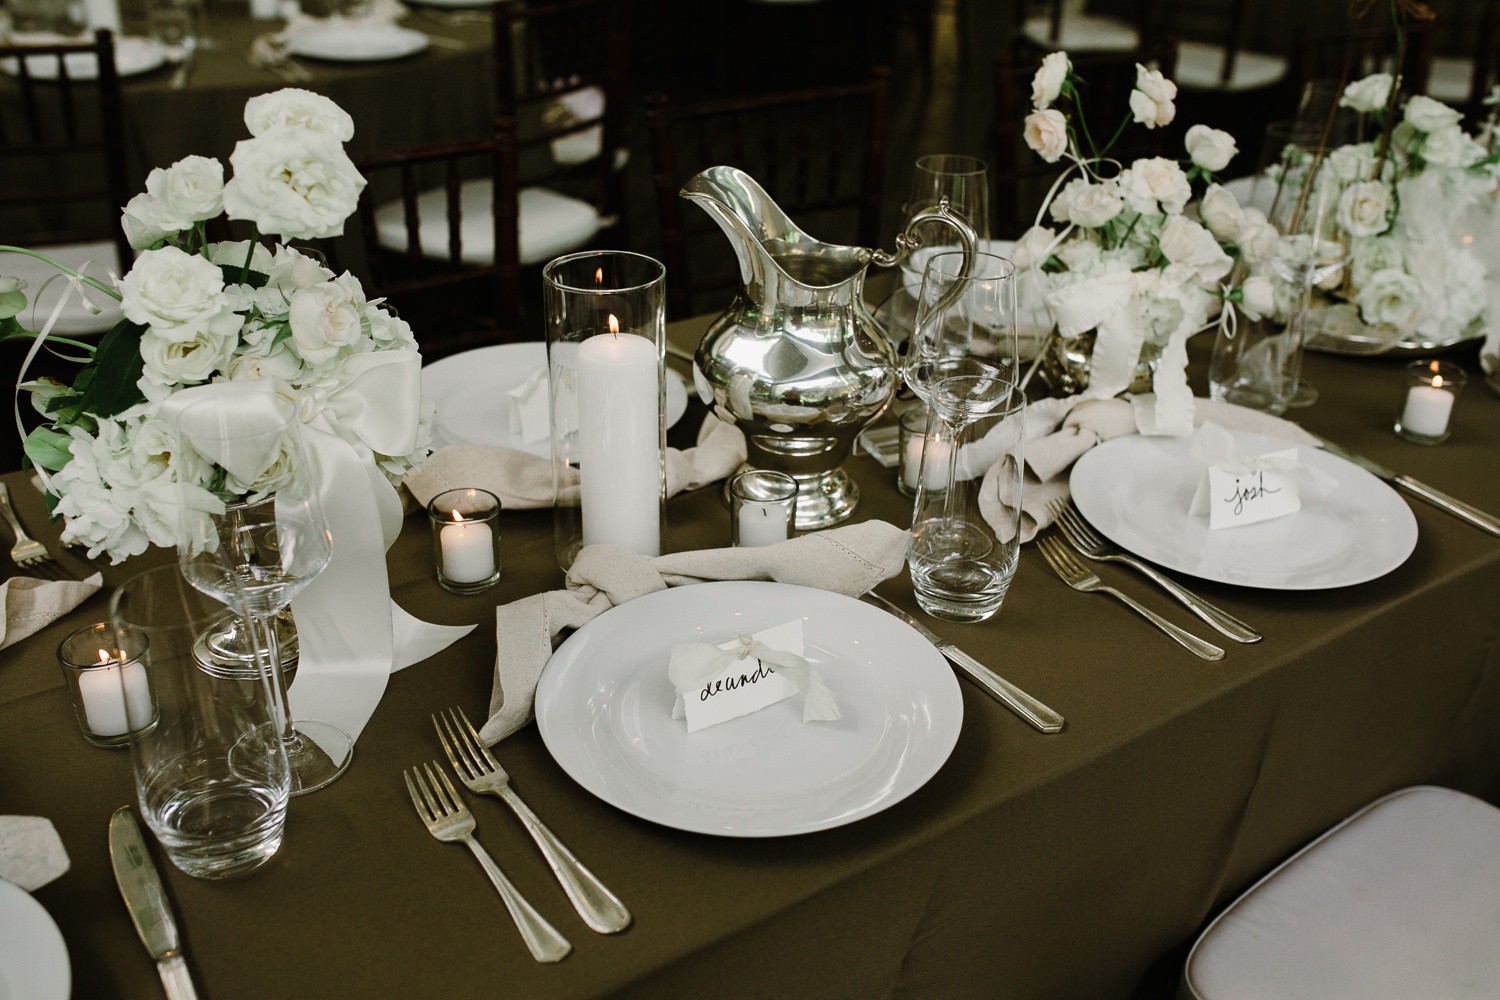 Spring wedding tablescape with an olive green tablecloth and white flowers